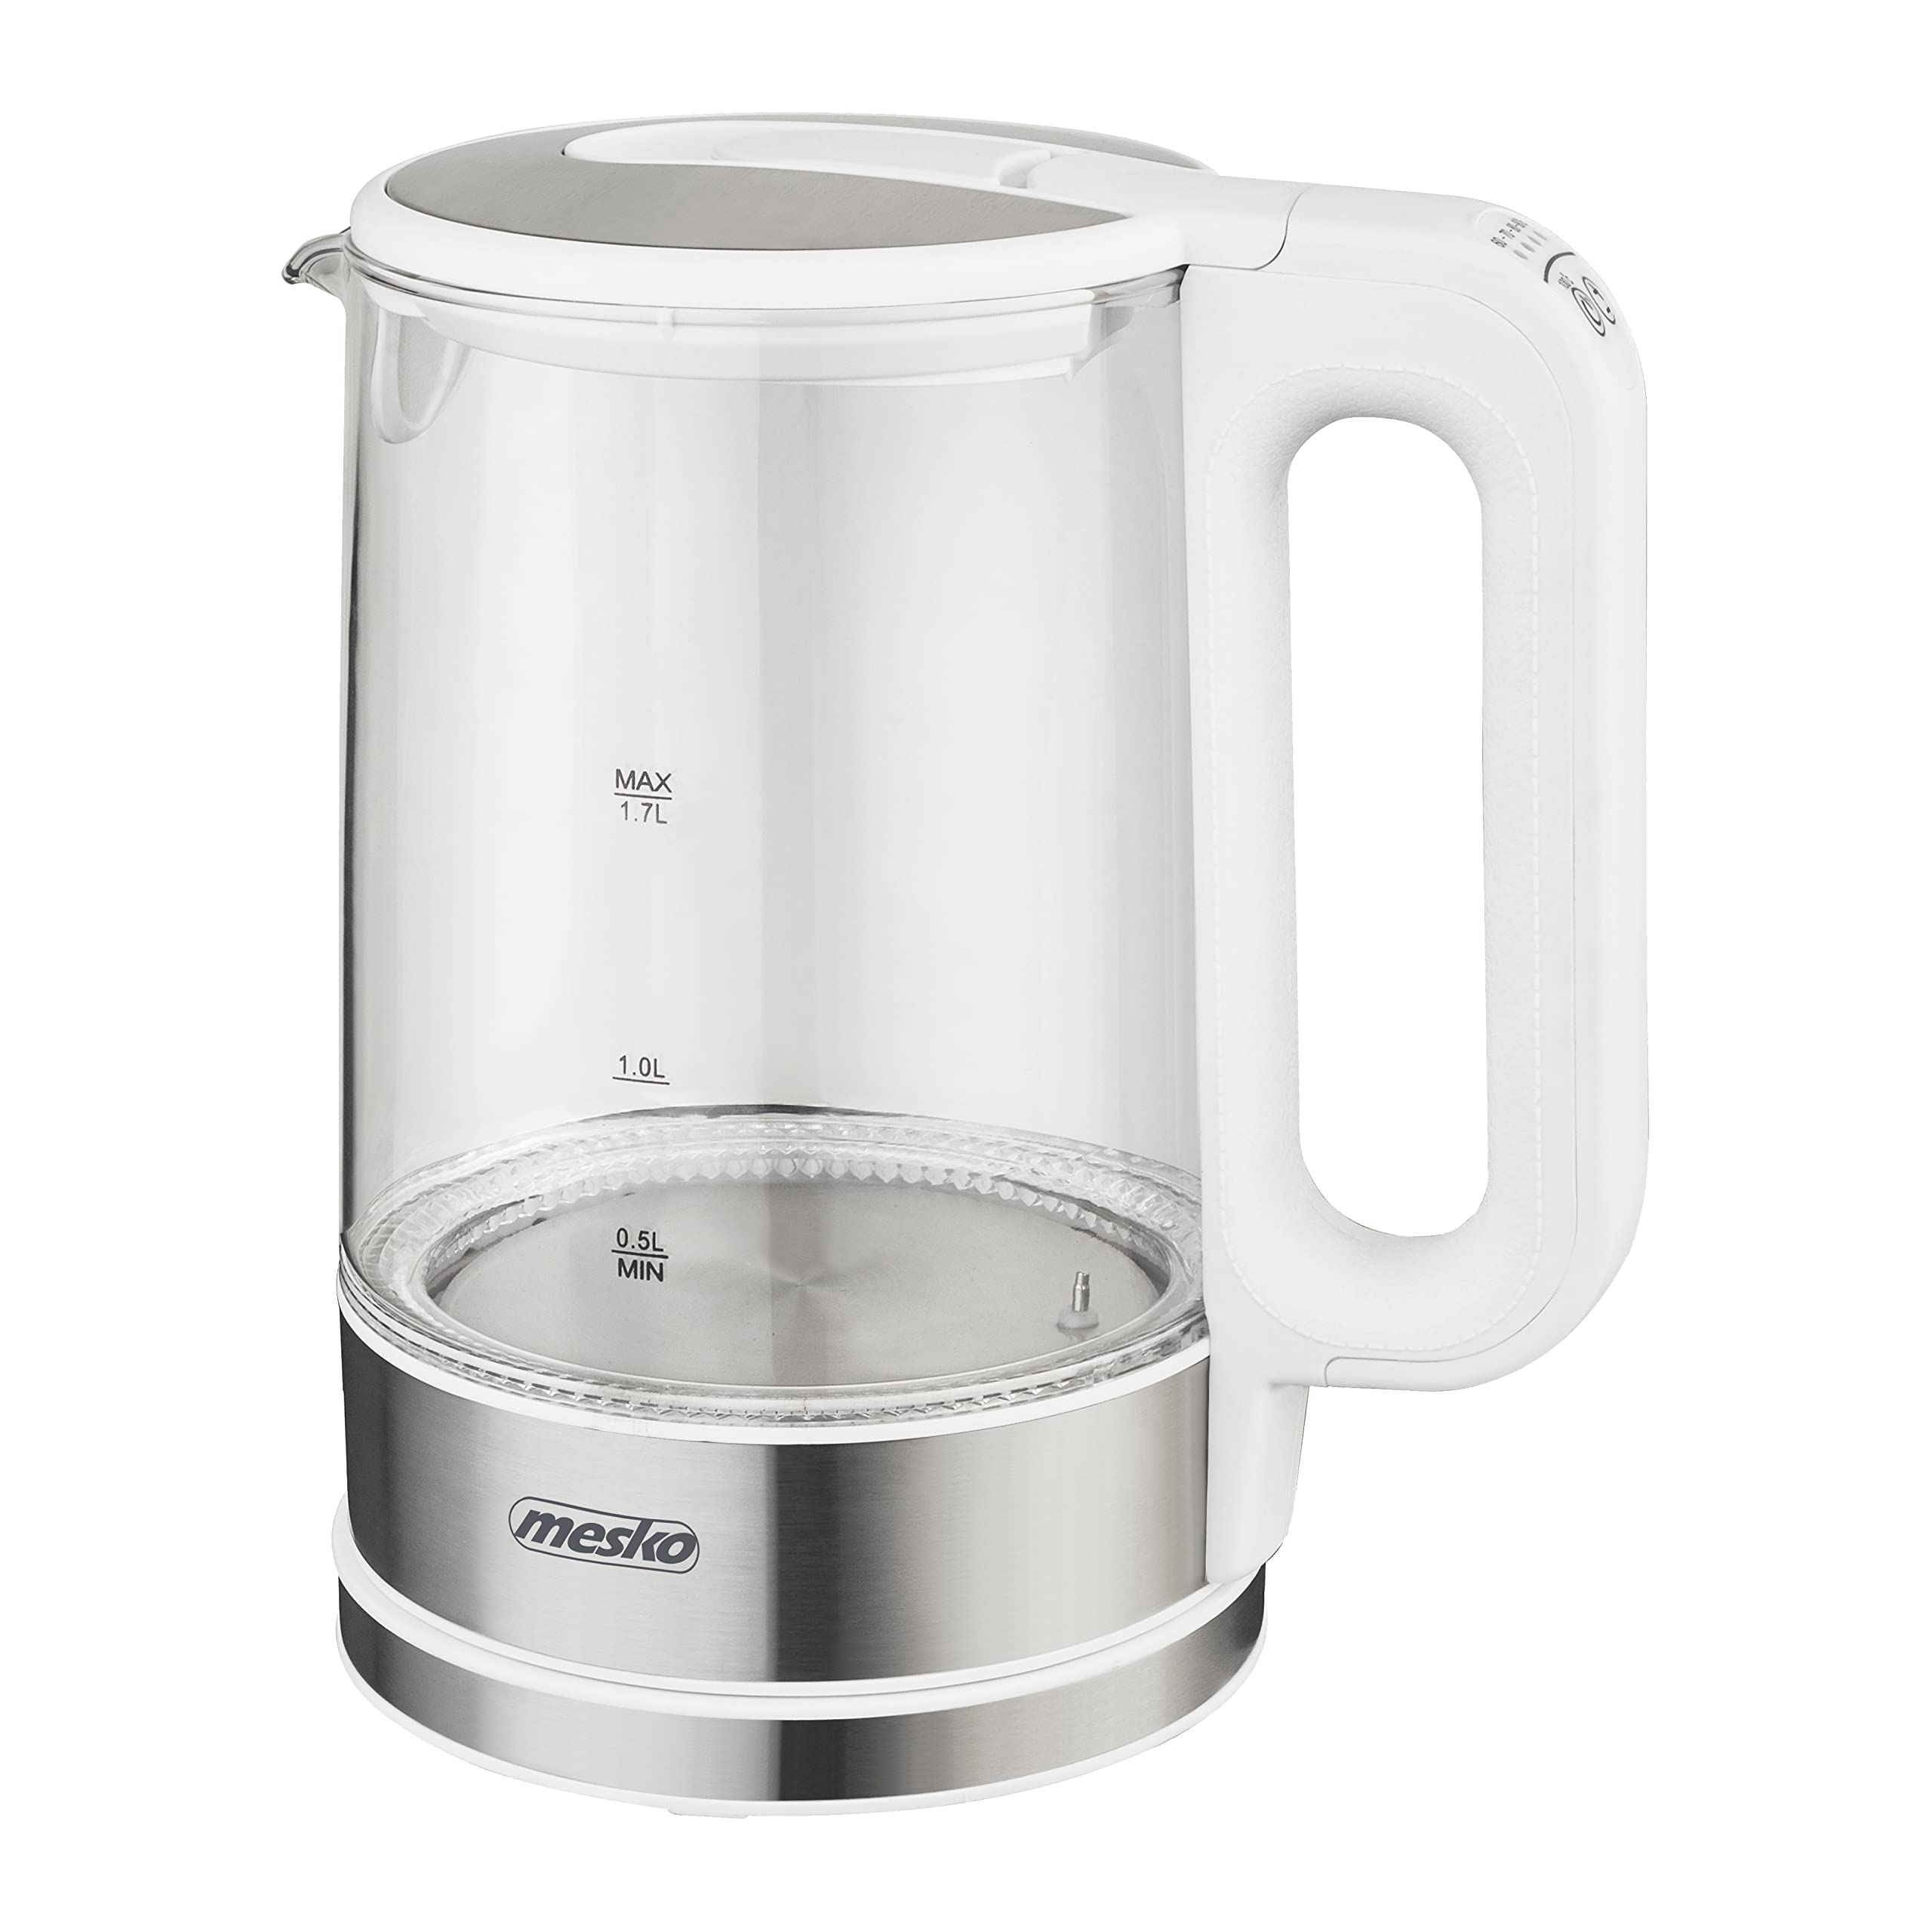 Mesko MS 1301w Kettle with Temperature Control, 1.7 L, Tea Kettle with LED Backlight, 2200 W, Kettle